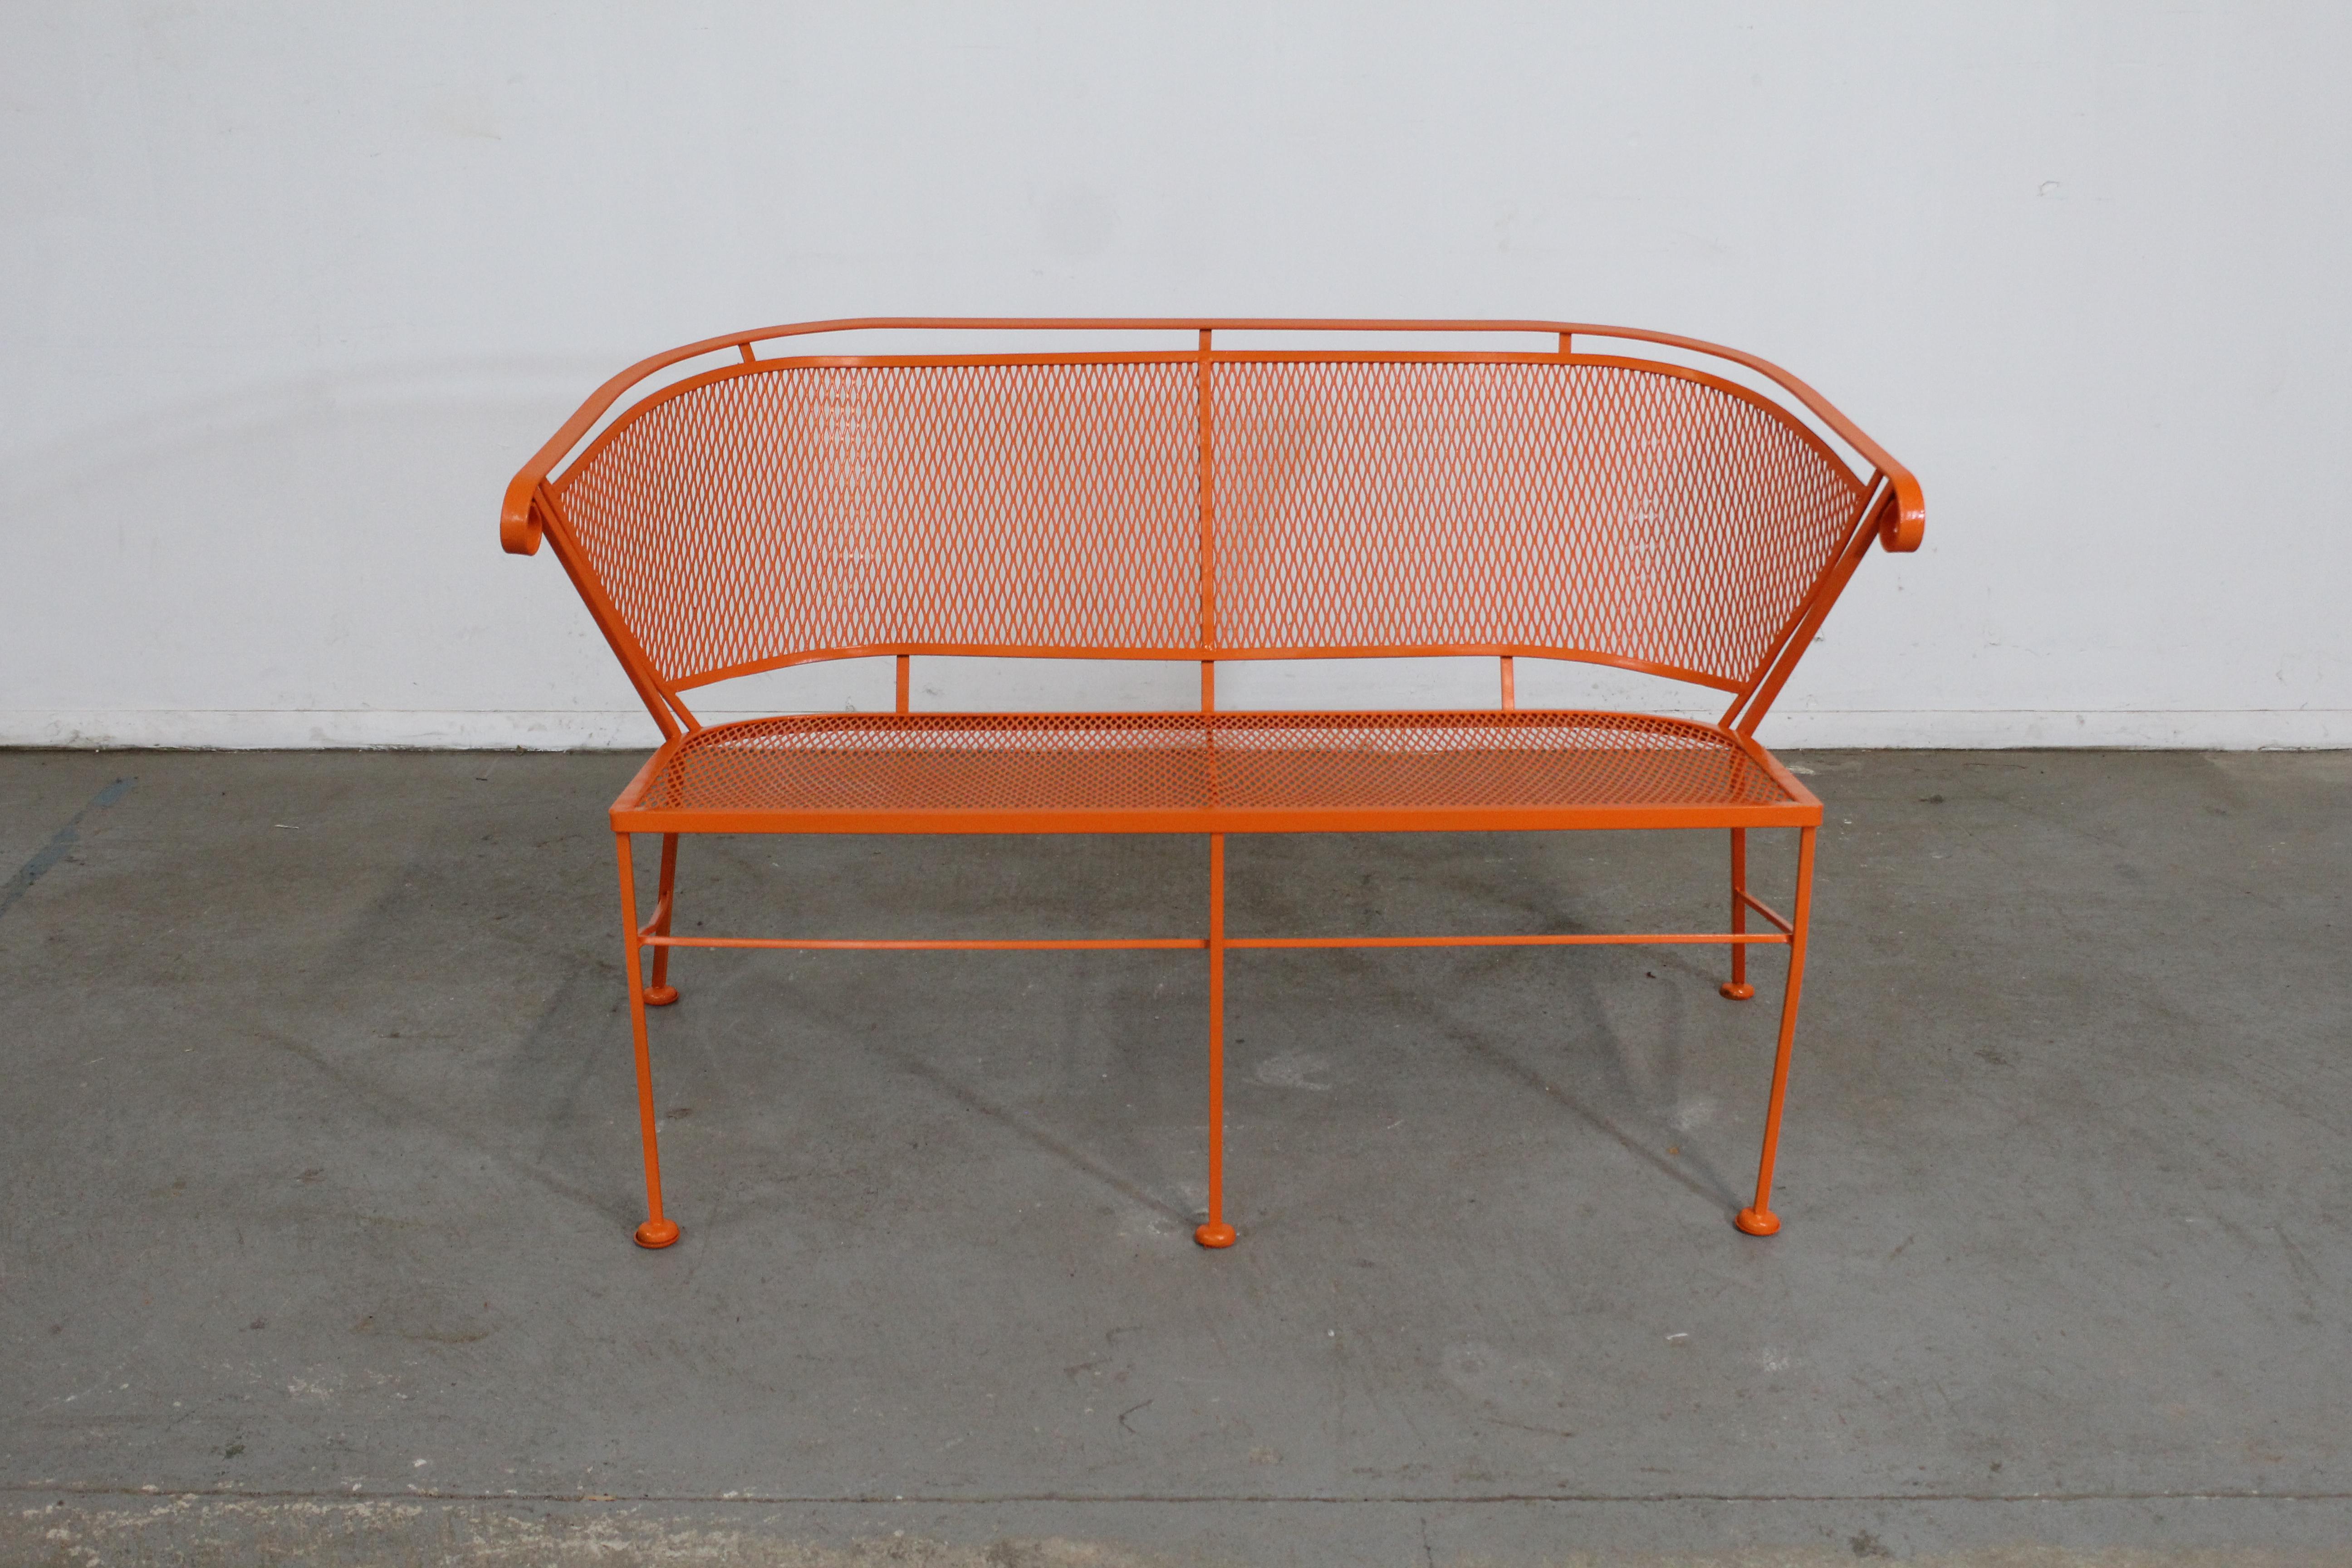 Mid-Century Modern atomic orange Salterini style outdoor metal curved back bench

Offered is a Mid-Century Modern atomic orange Salterini style outdoor metal curved back bench, circa 1960's. This bench has been repainted in an atomic orange. It is